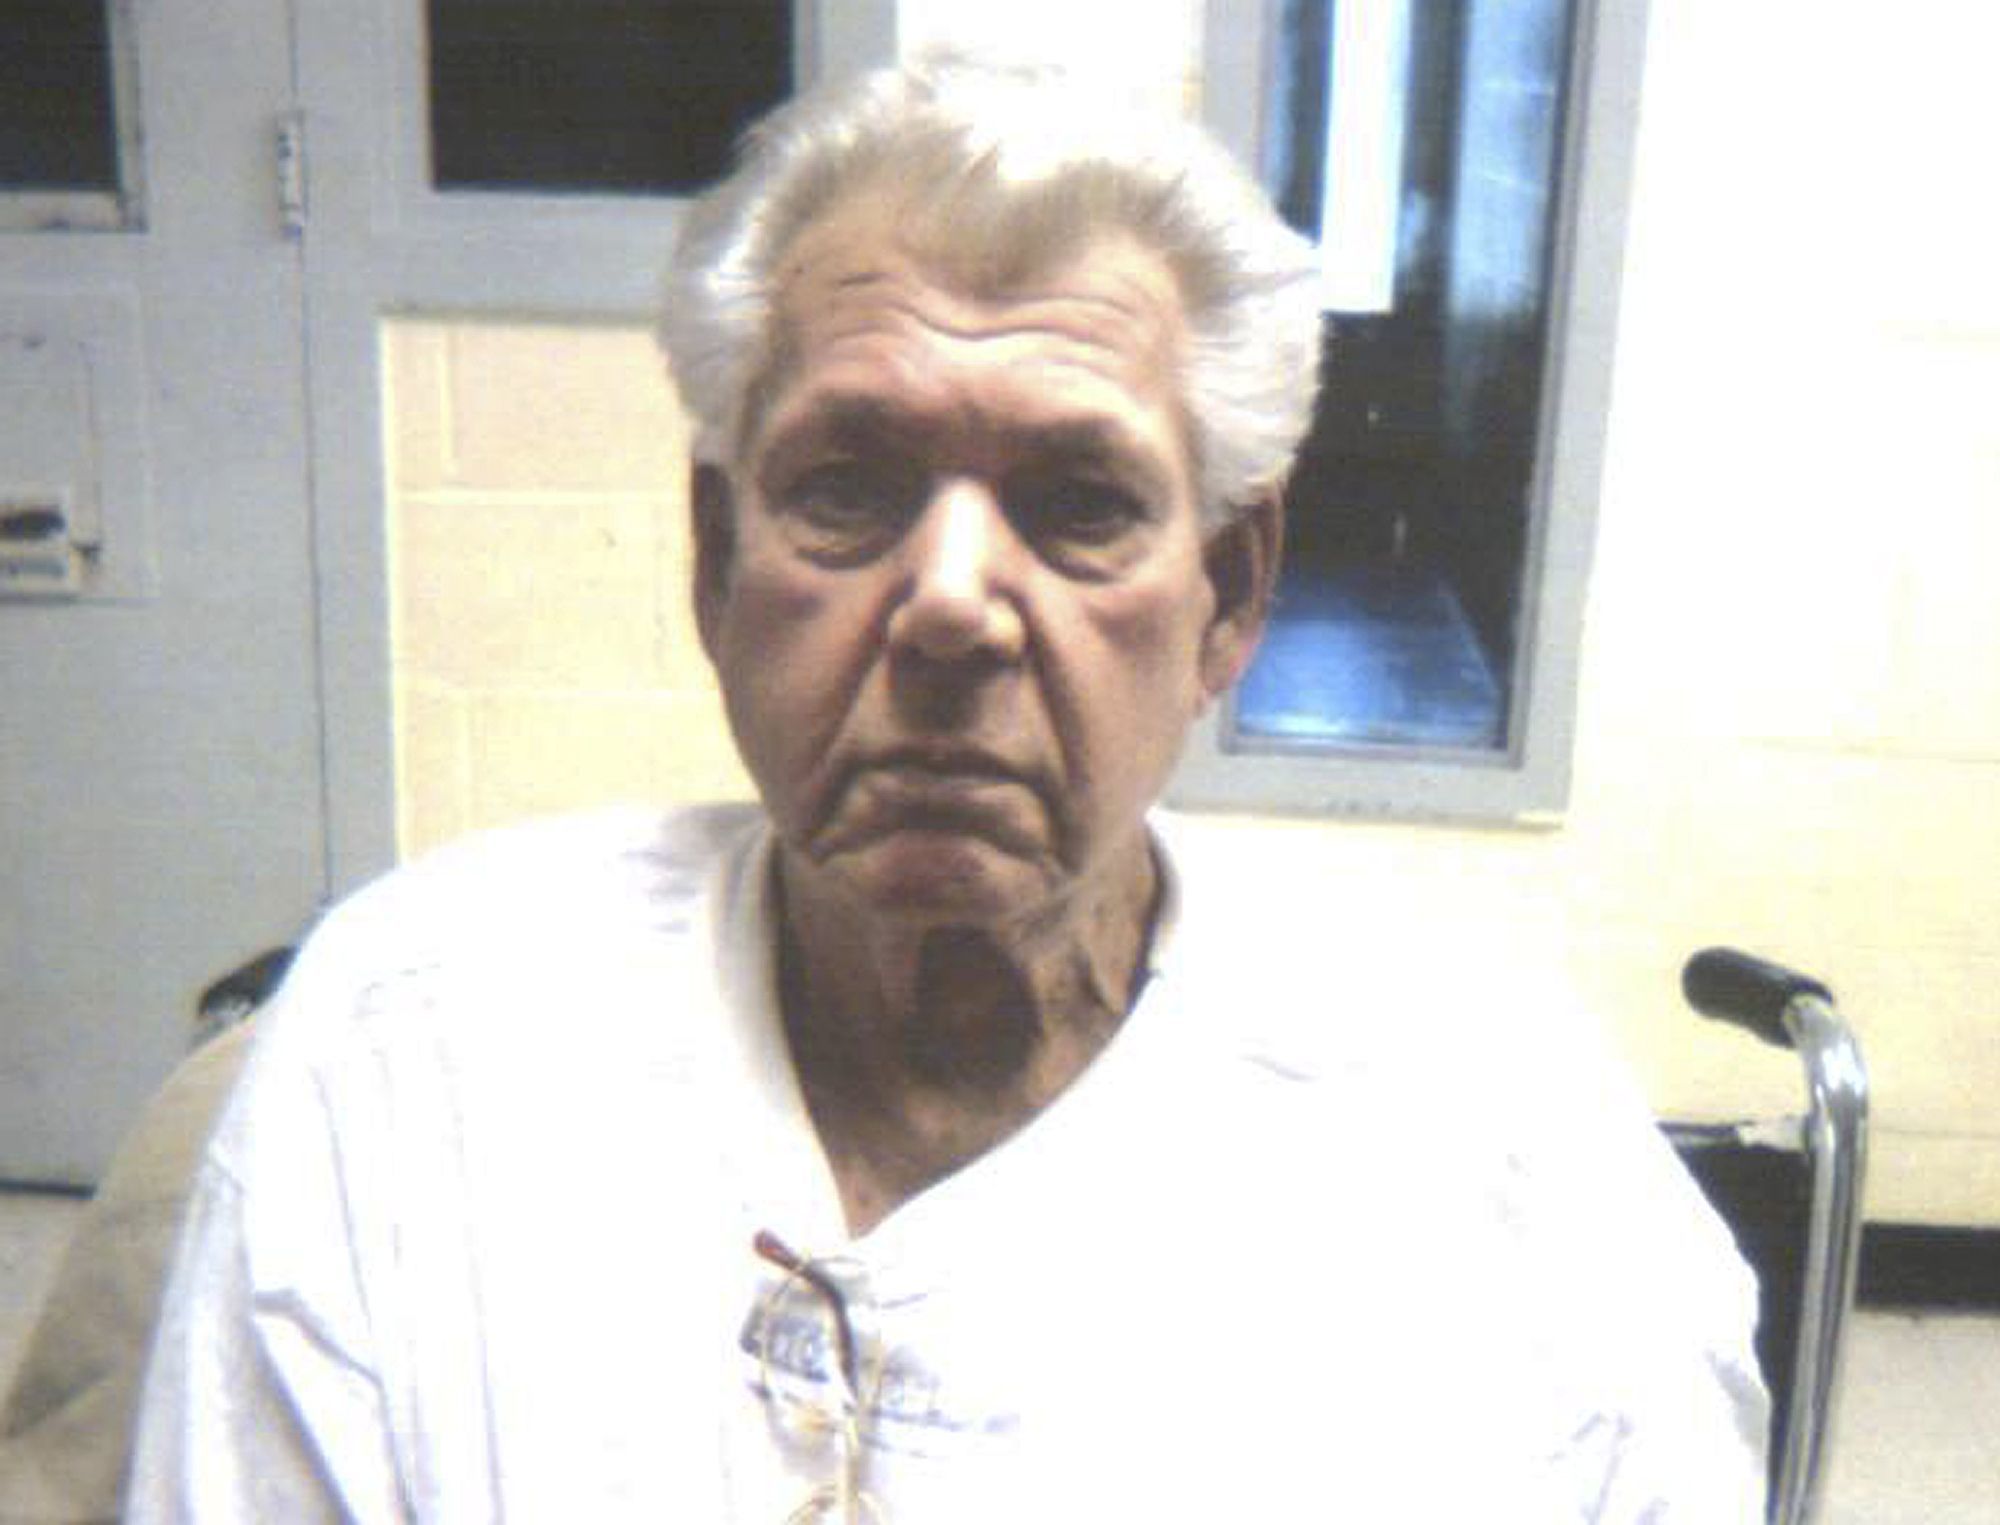 This photo shows Robert Stackowitz, 71, arrested Monday.